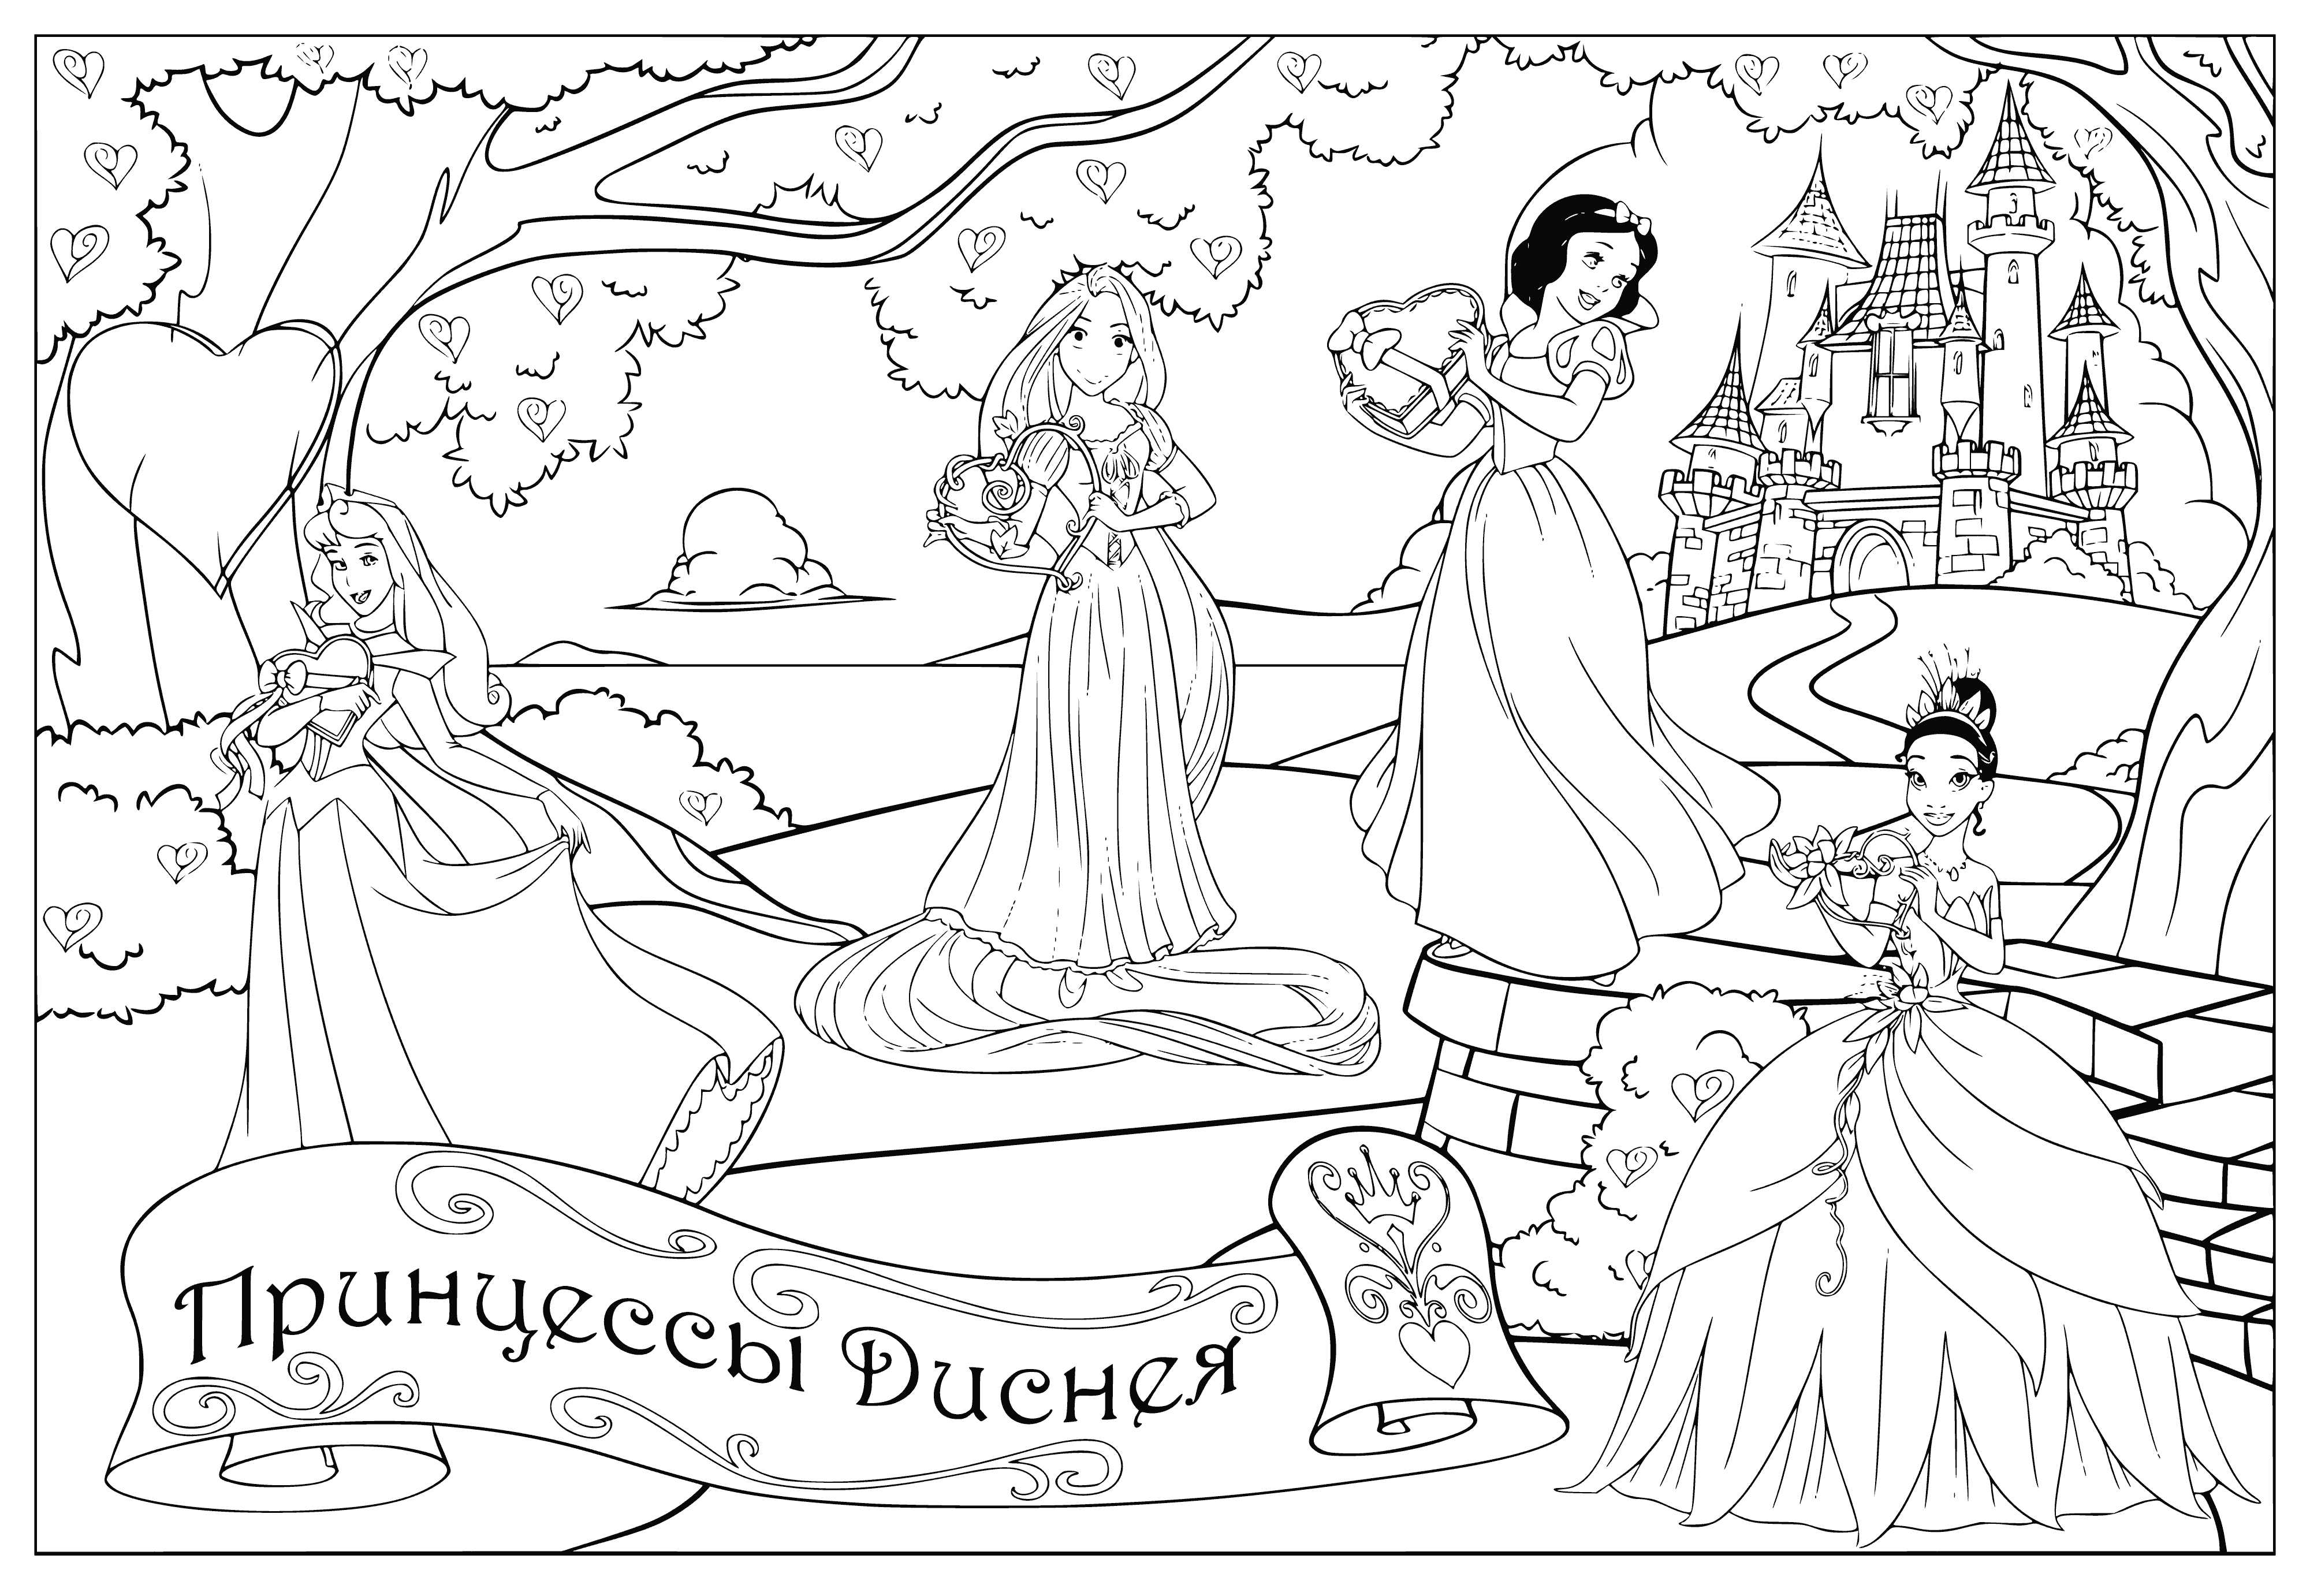 coloring page: 3 classic princesses smiling: Sleeping Beauty (crown), Cinderella (wand) & Snow White (bow). All wearing blue dresses.